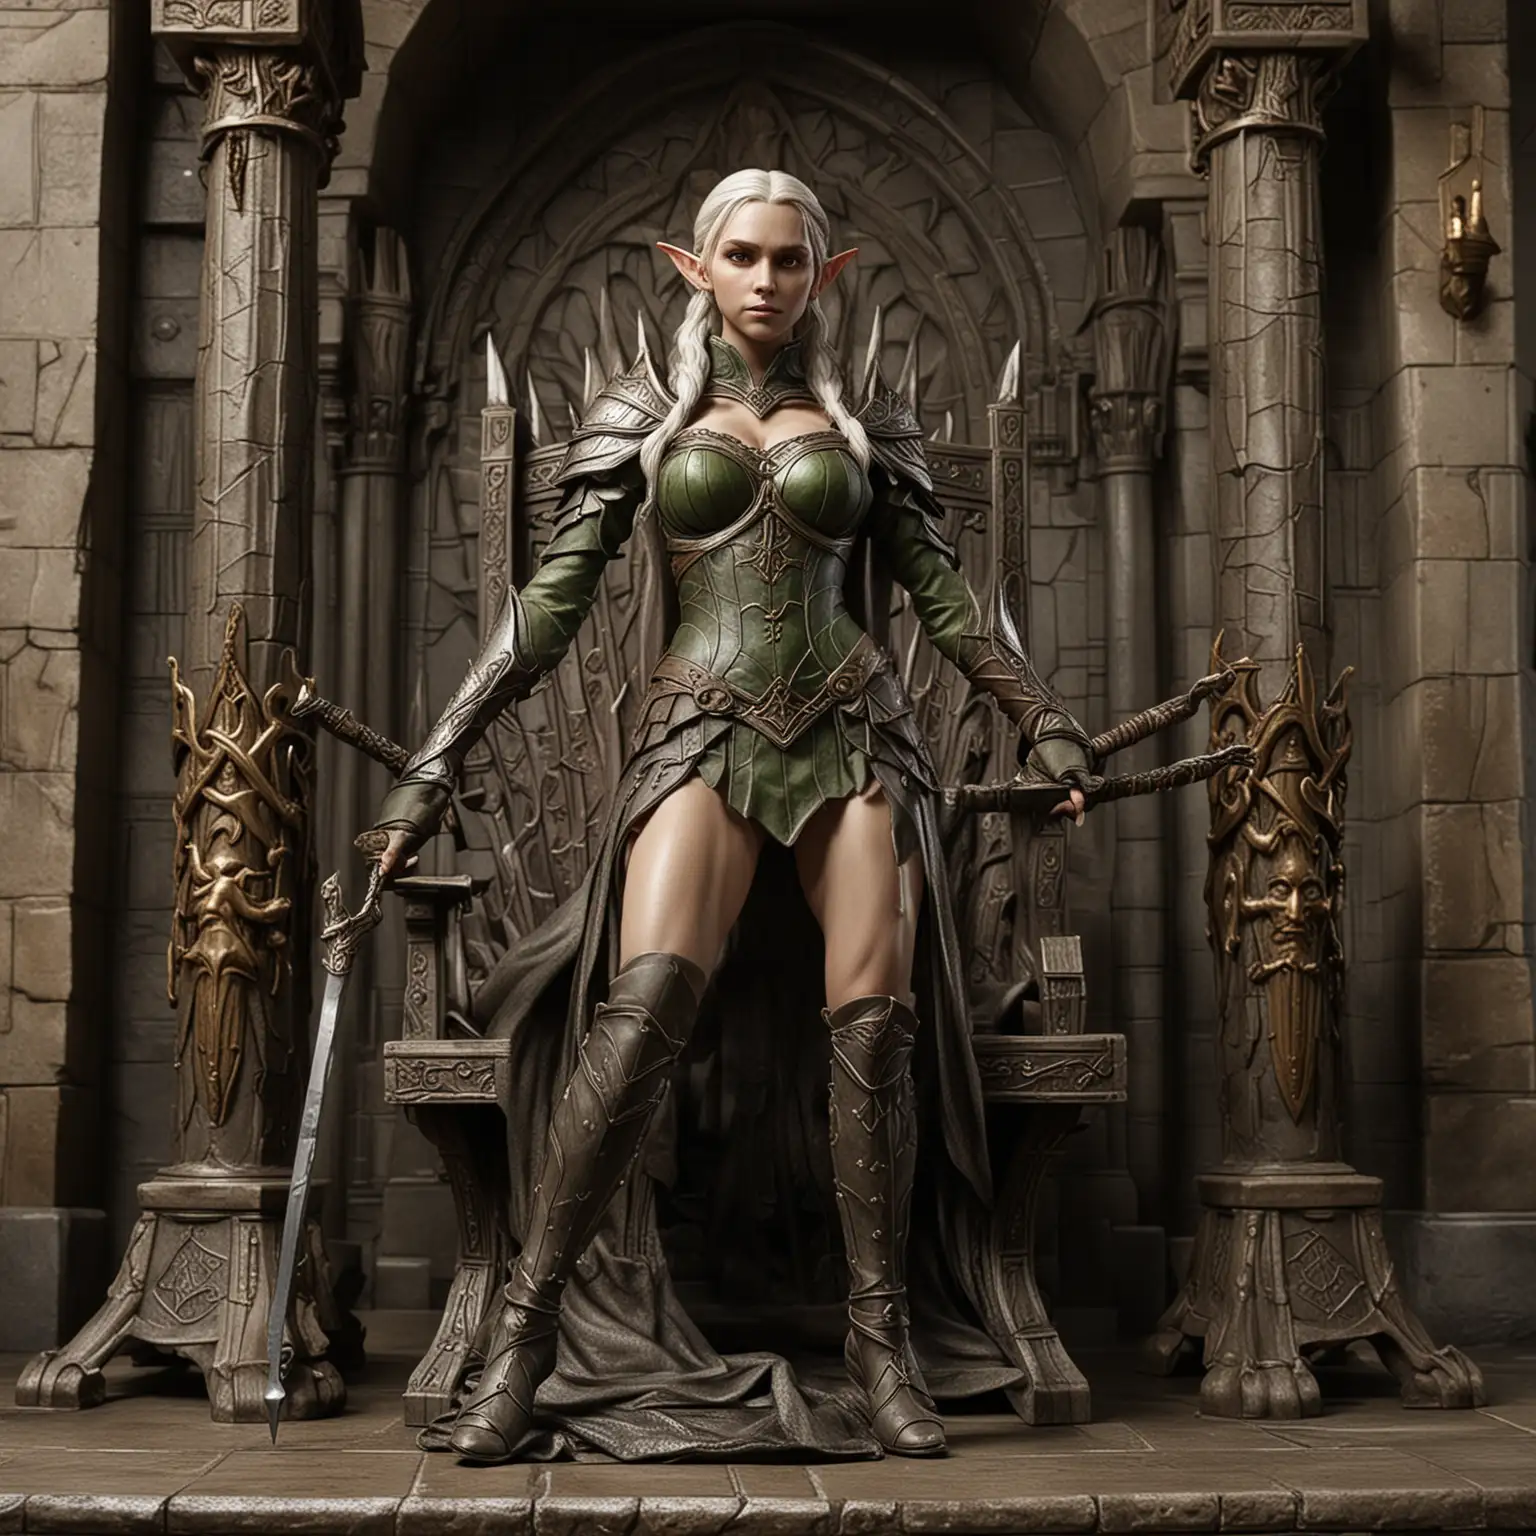 Statue of Female Elf Warrior with Dual Shortswords